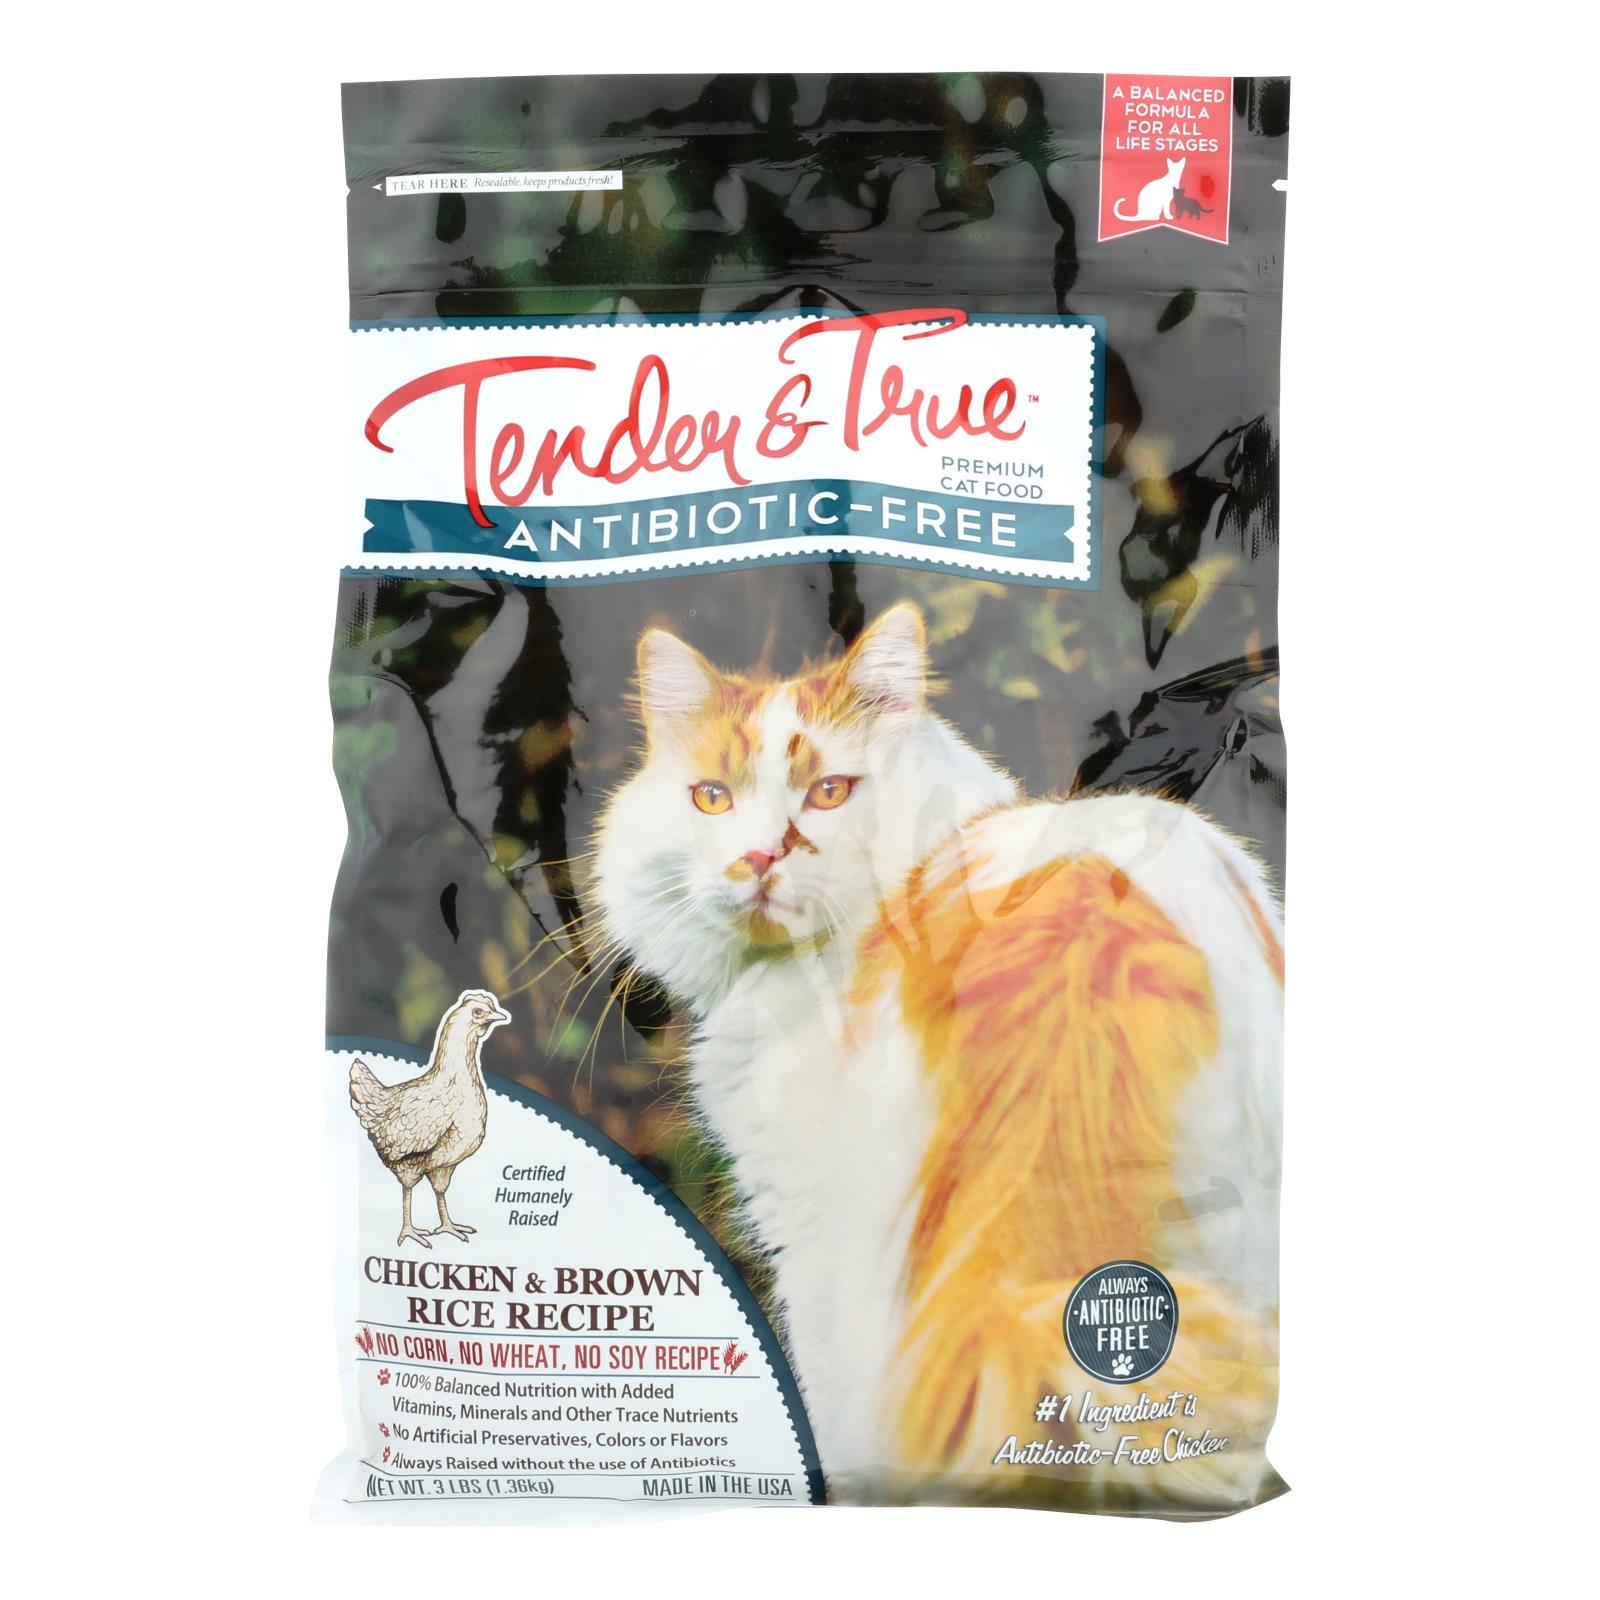 Tender & True Cat Food Chicken And Liver - 6개 묶음상품 - 3 LB